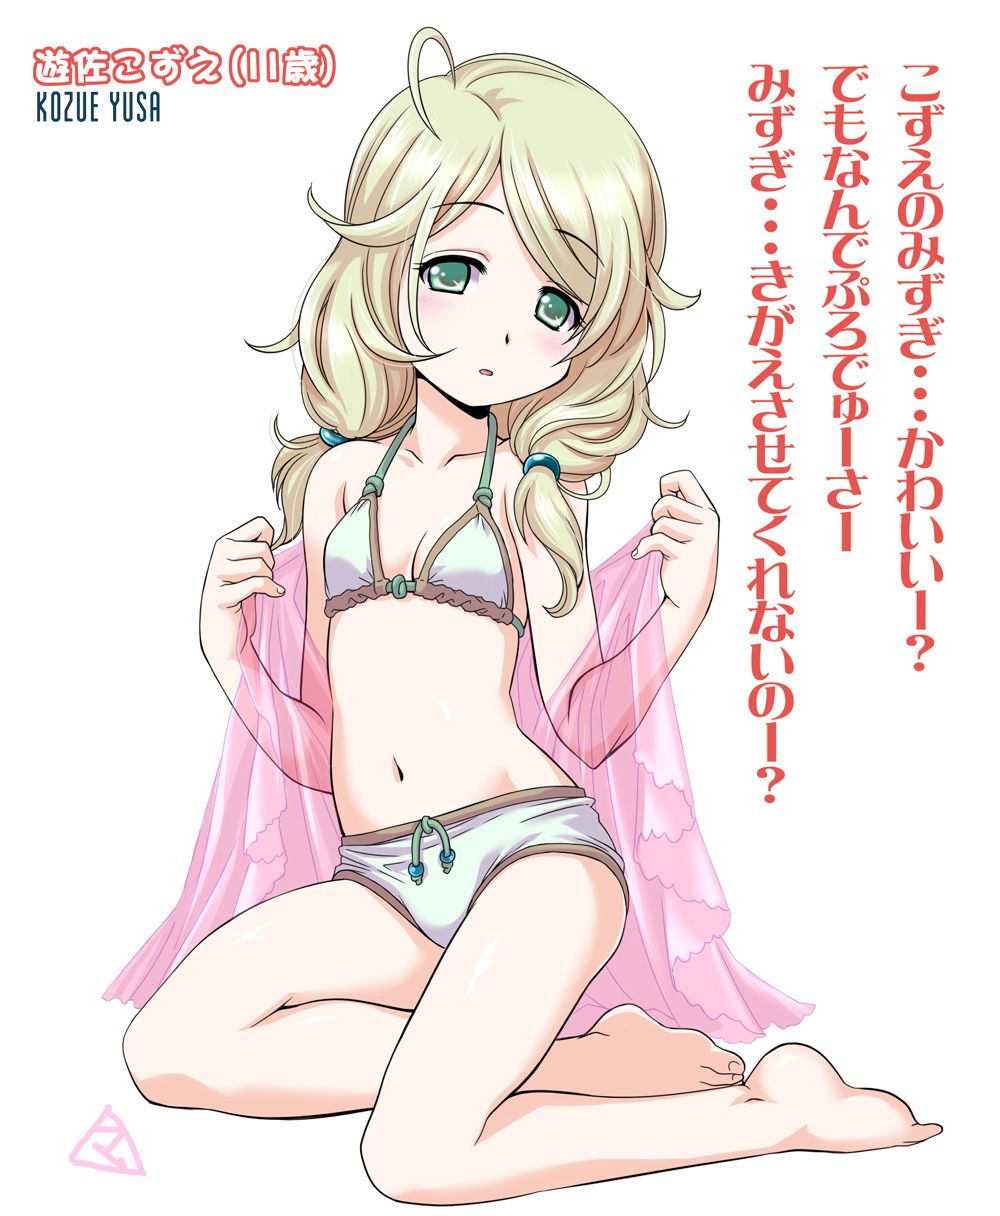 [Second / ZIP] soft sleepy idle yusa the rie's of cute images together "Cinderella girls (mobamas). 37